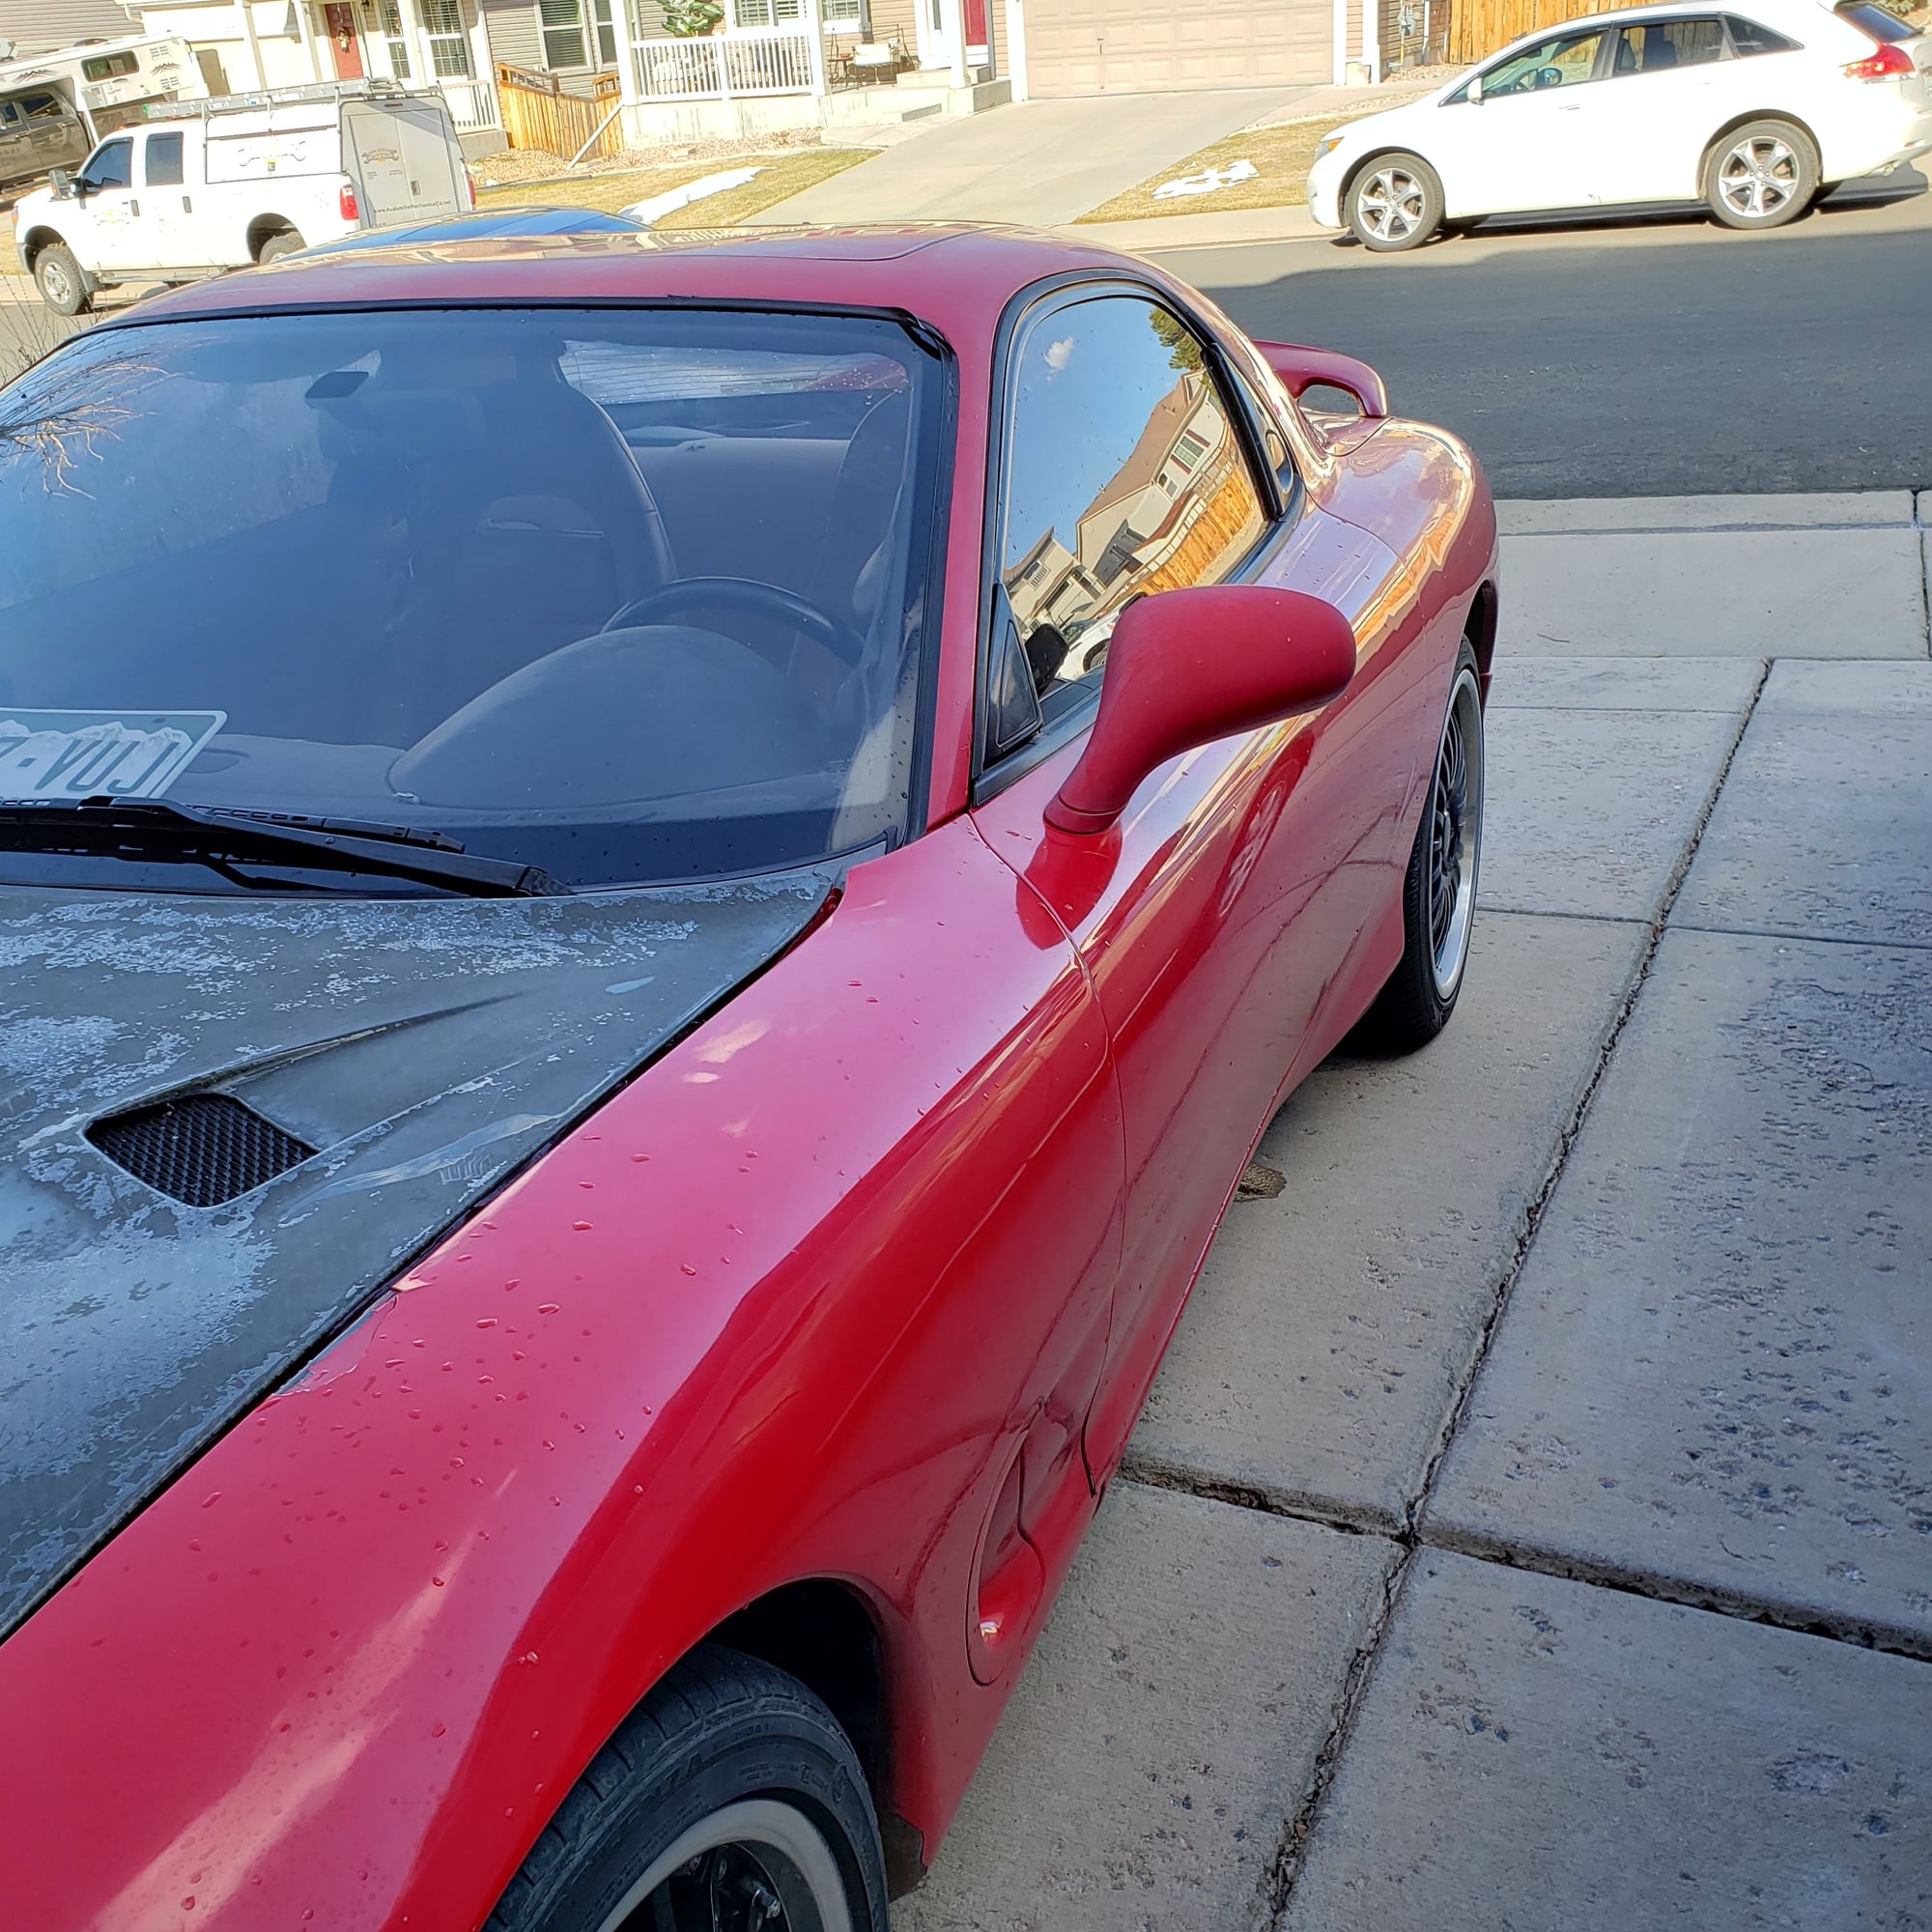 1993 Mazda RX-7 - 1993 Rx-7 Project for sale - Used - VIN JM1FD3316P0208995 - 84,000 Miles - Other - 2WD - Manual - Red - Castle Rock, CO 80109, United States